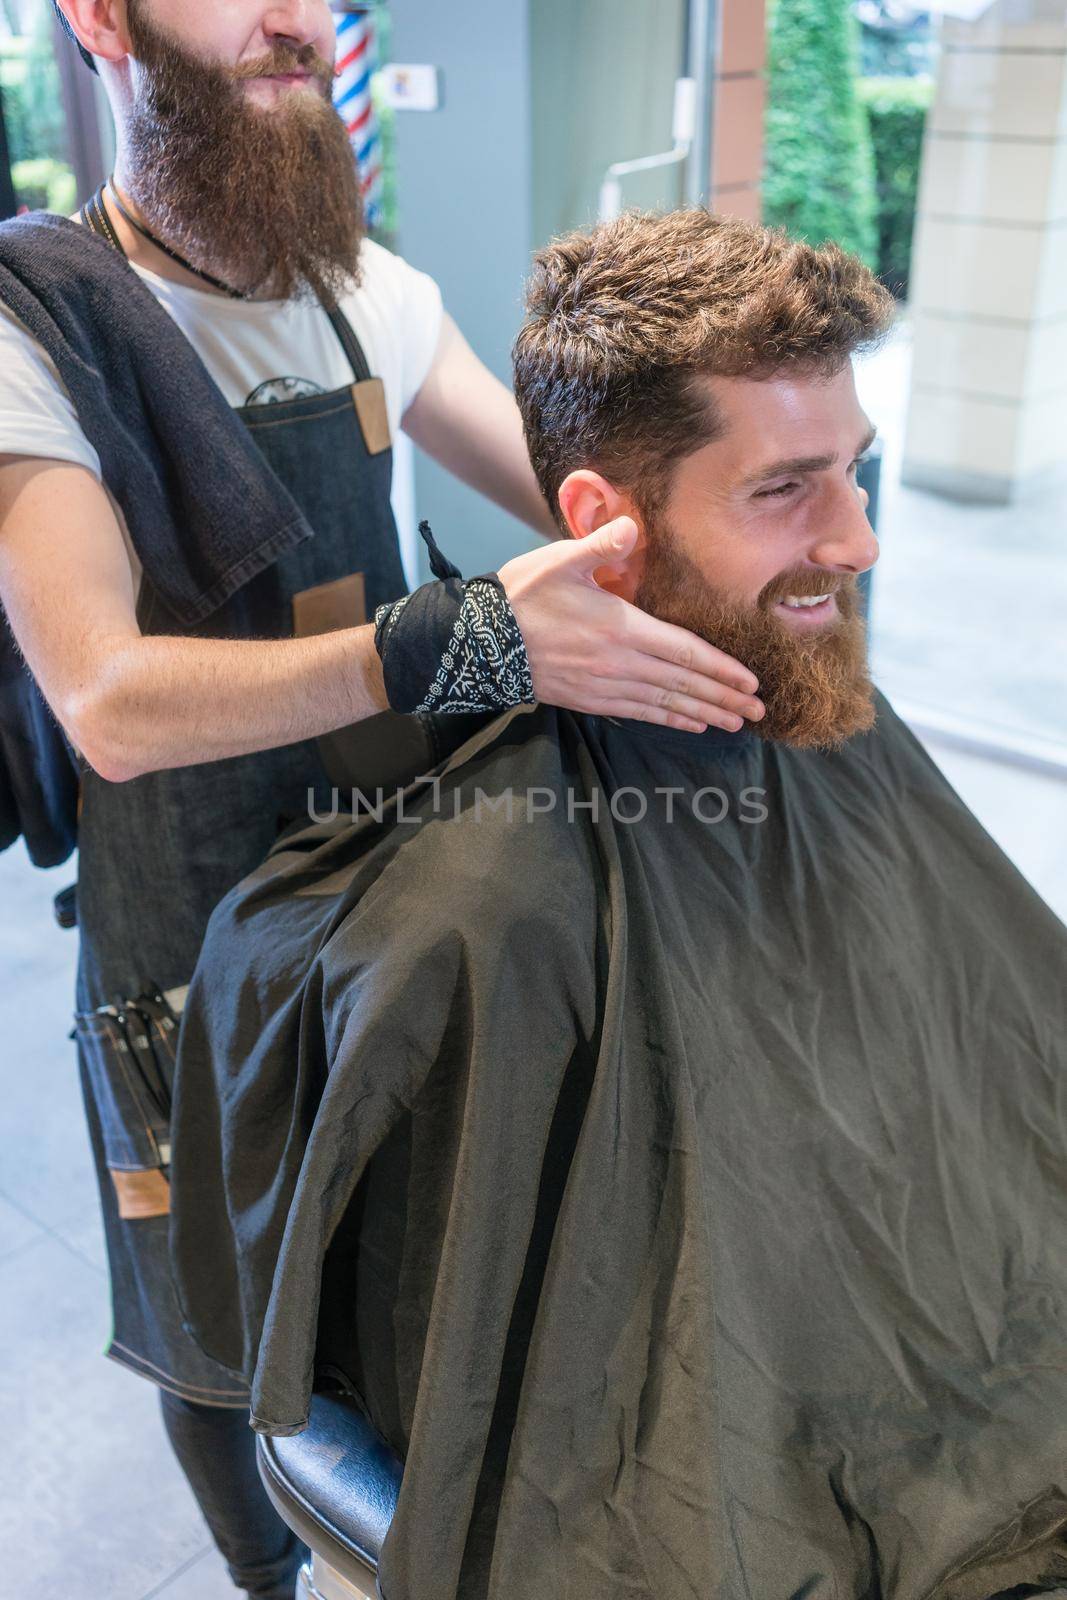 Handsome young man sitting on hair styling chair, while smiling and thinking of a different shape for his beard at the advice of his barber in the beauty salon